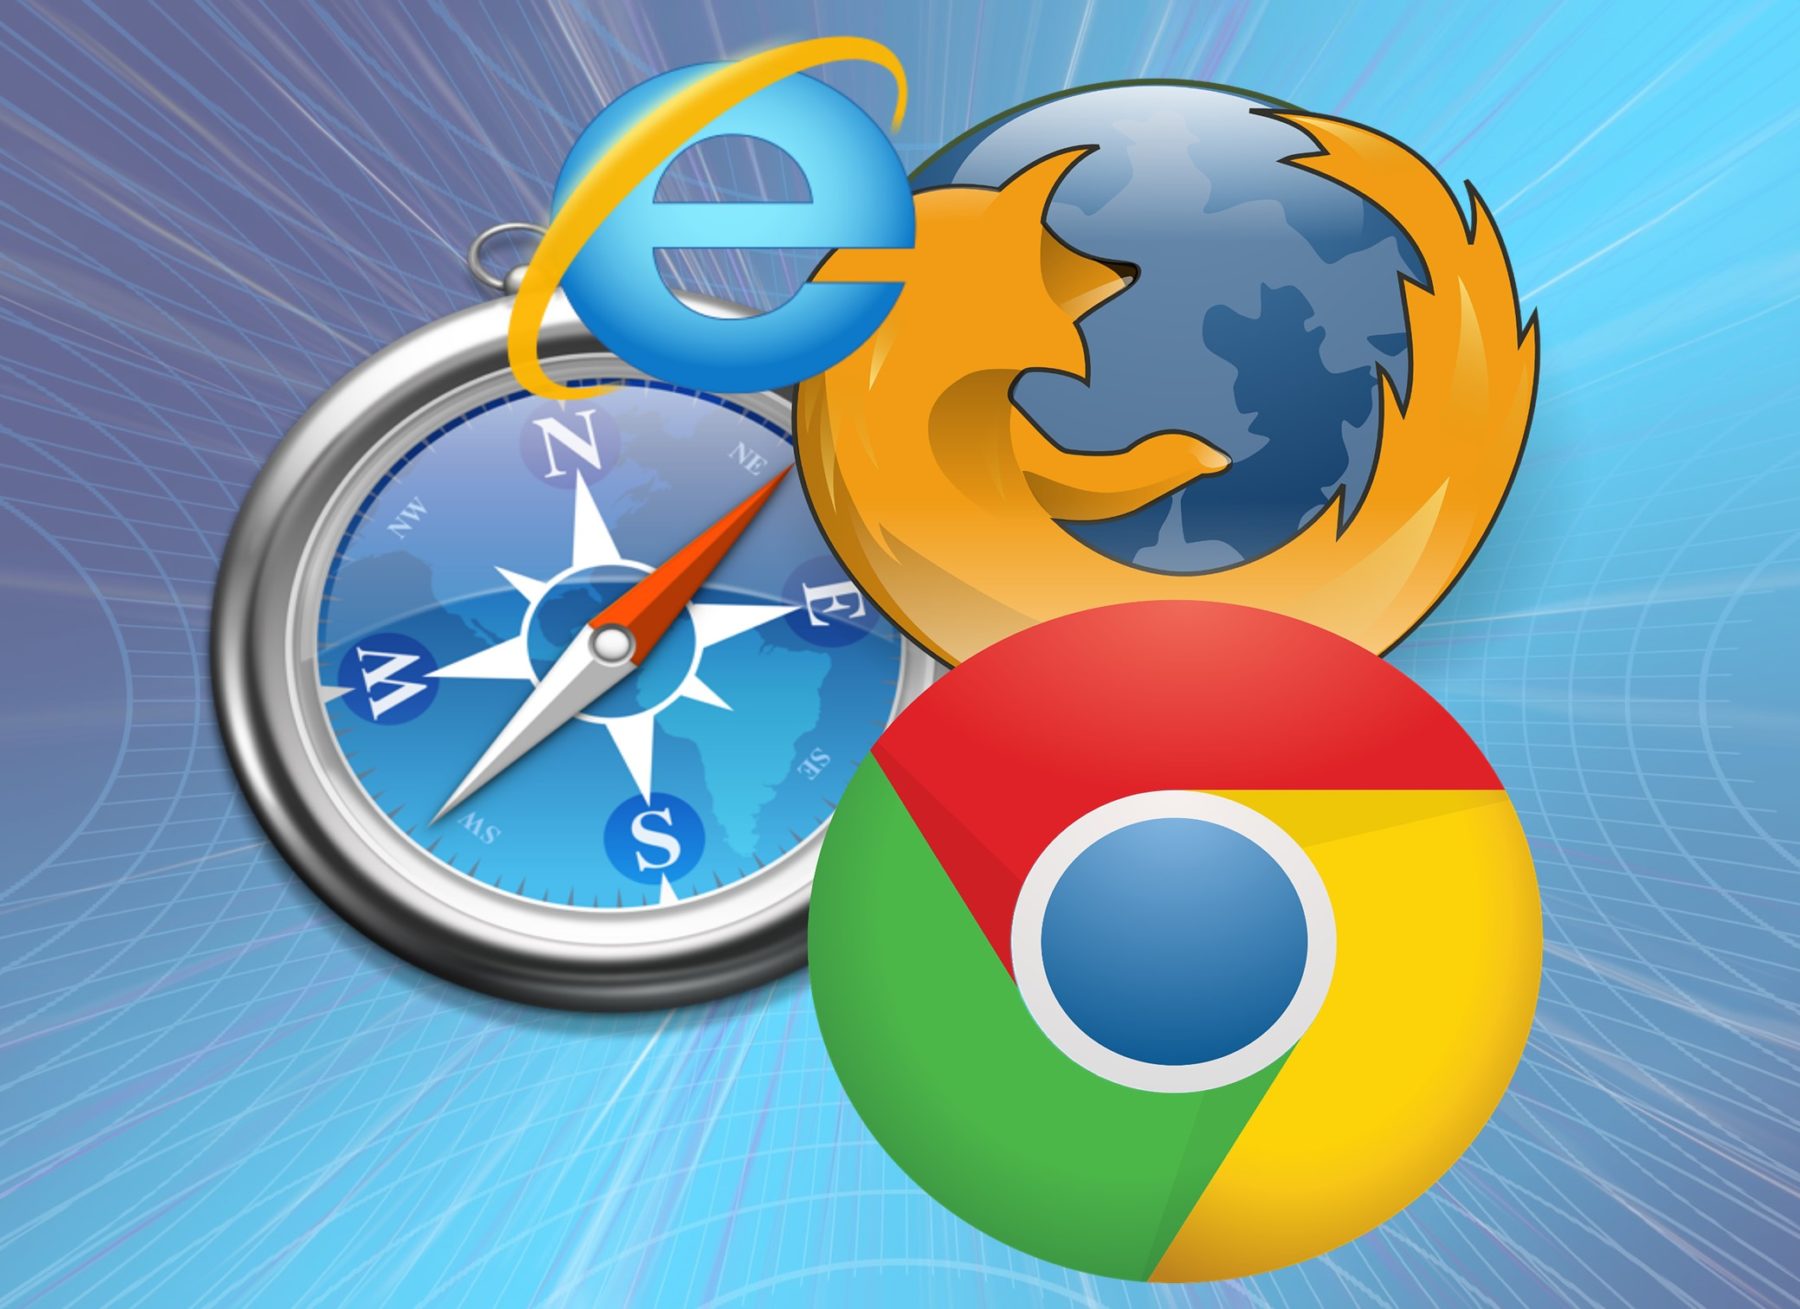 which is faster safari or chrome